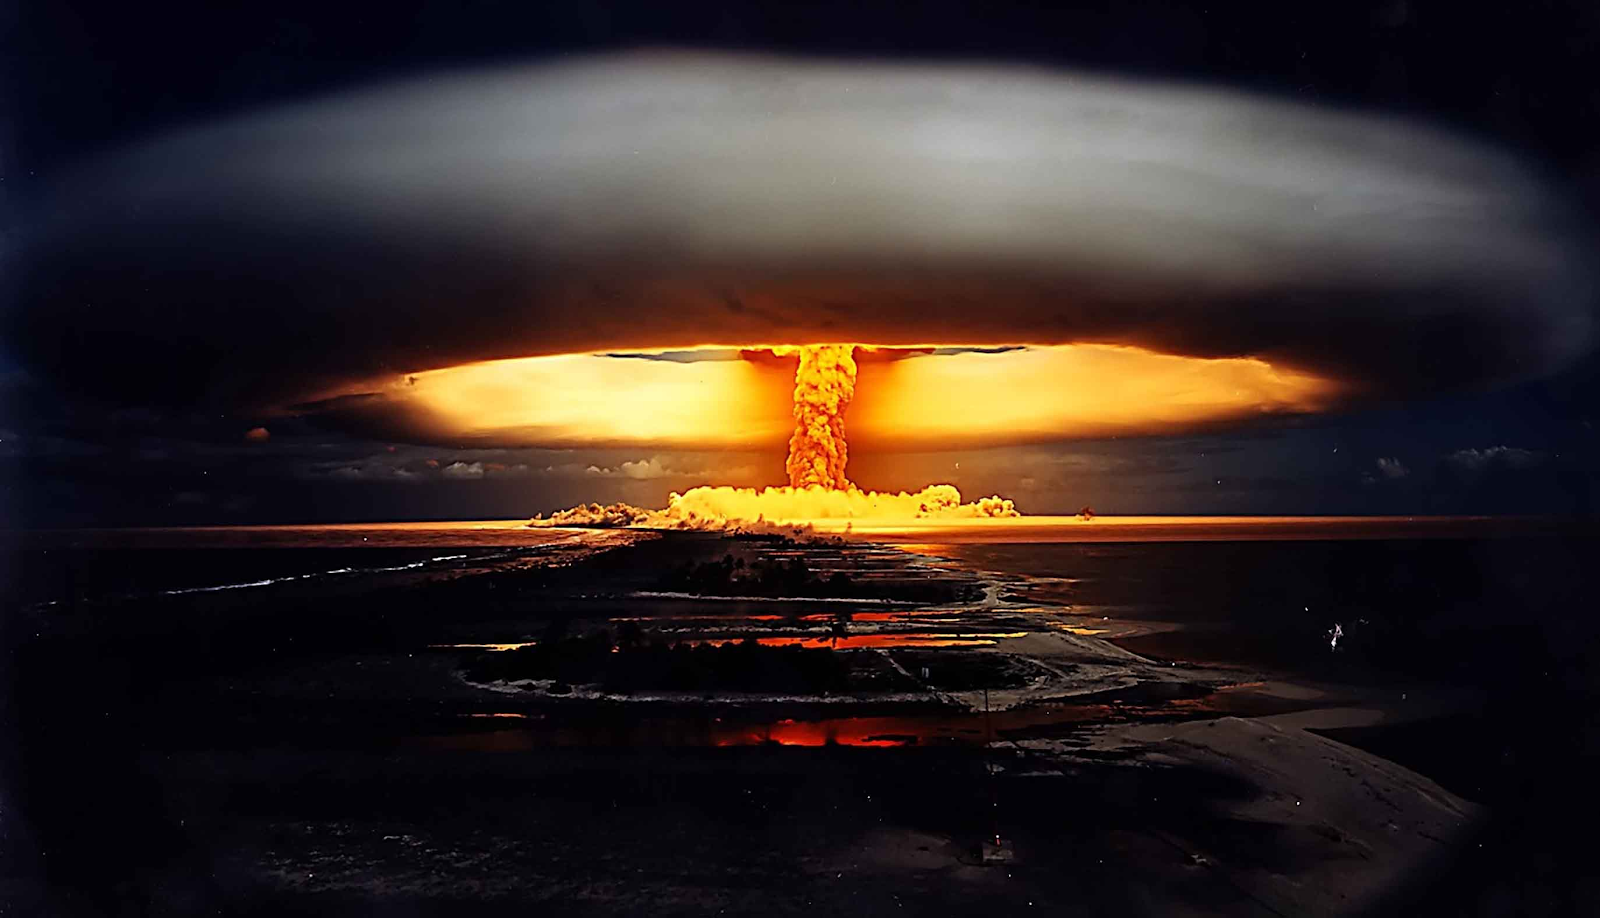 Tsar Bomba - The biggest thermonuclear explosion of the History